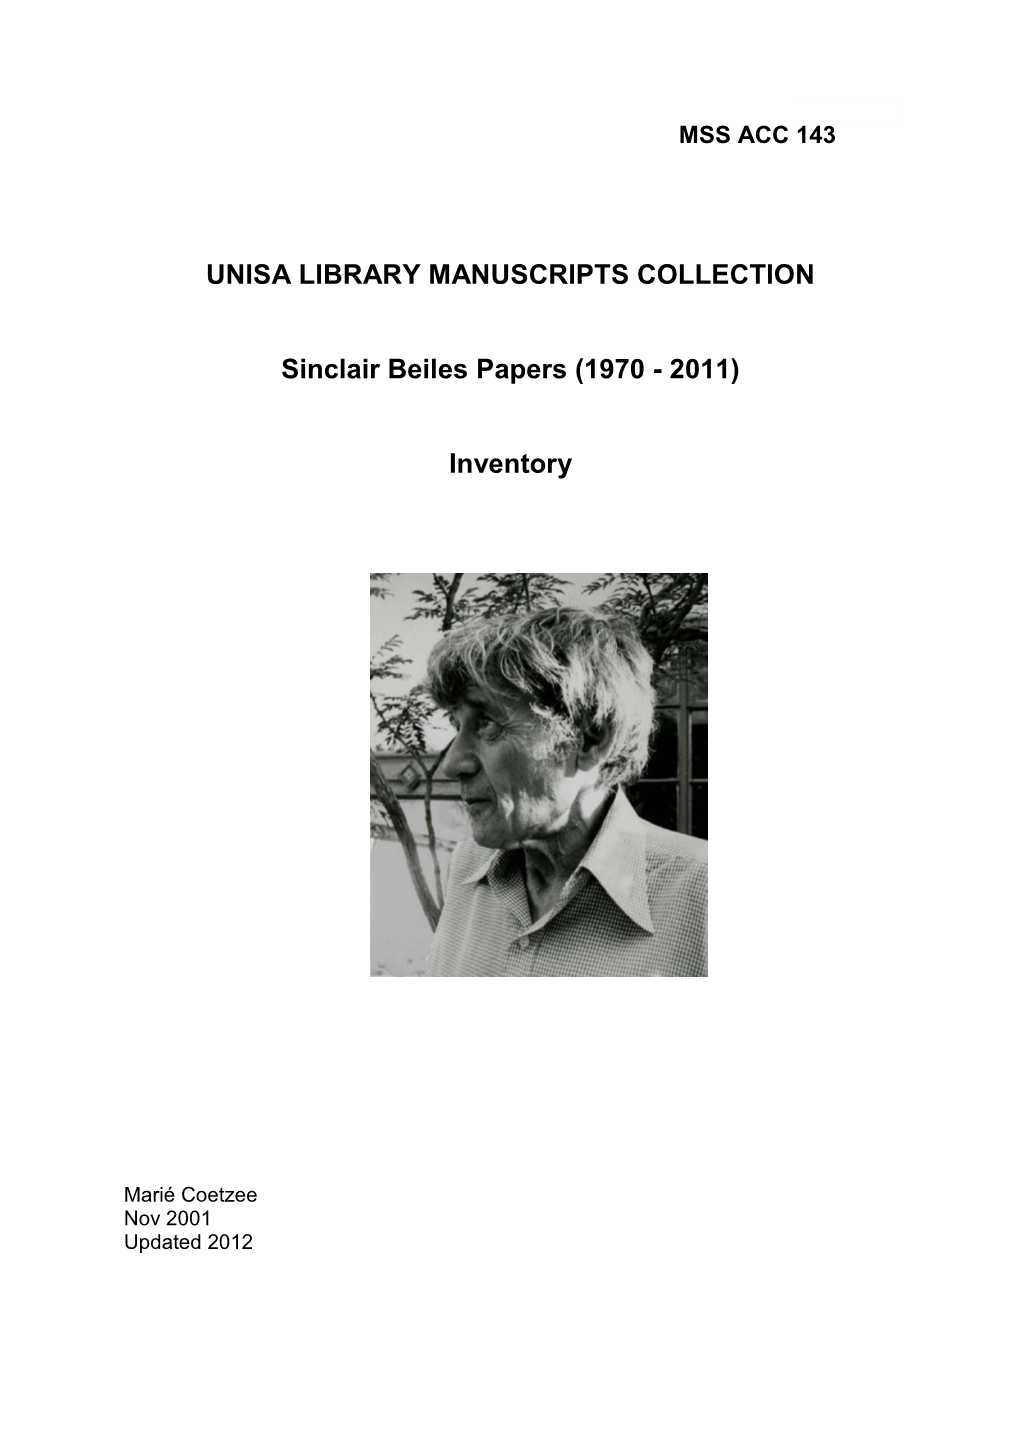 UNISA LIBRARY MANUSCRIPTS COLLECTION Sinclair Beiles Papers